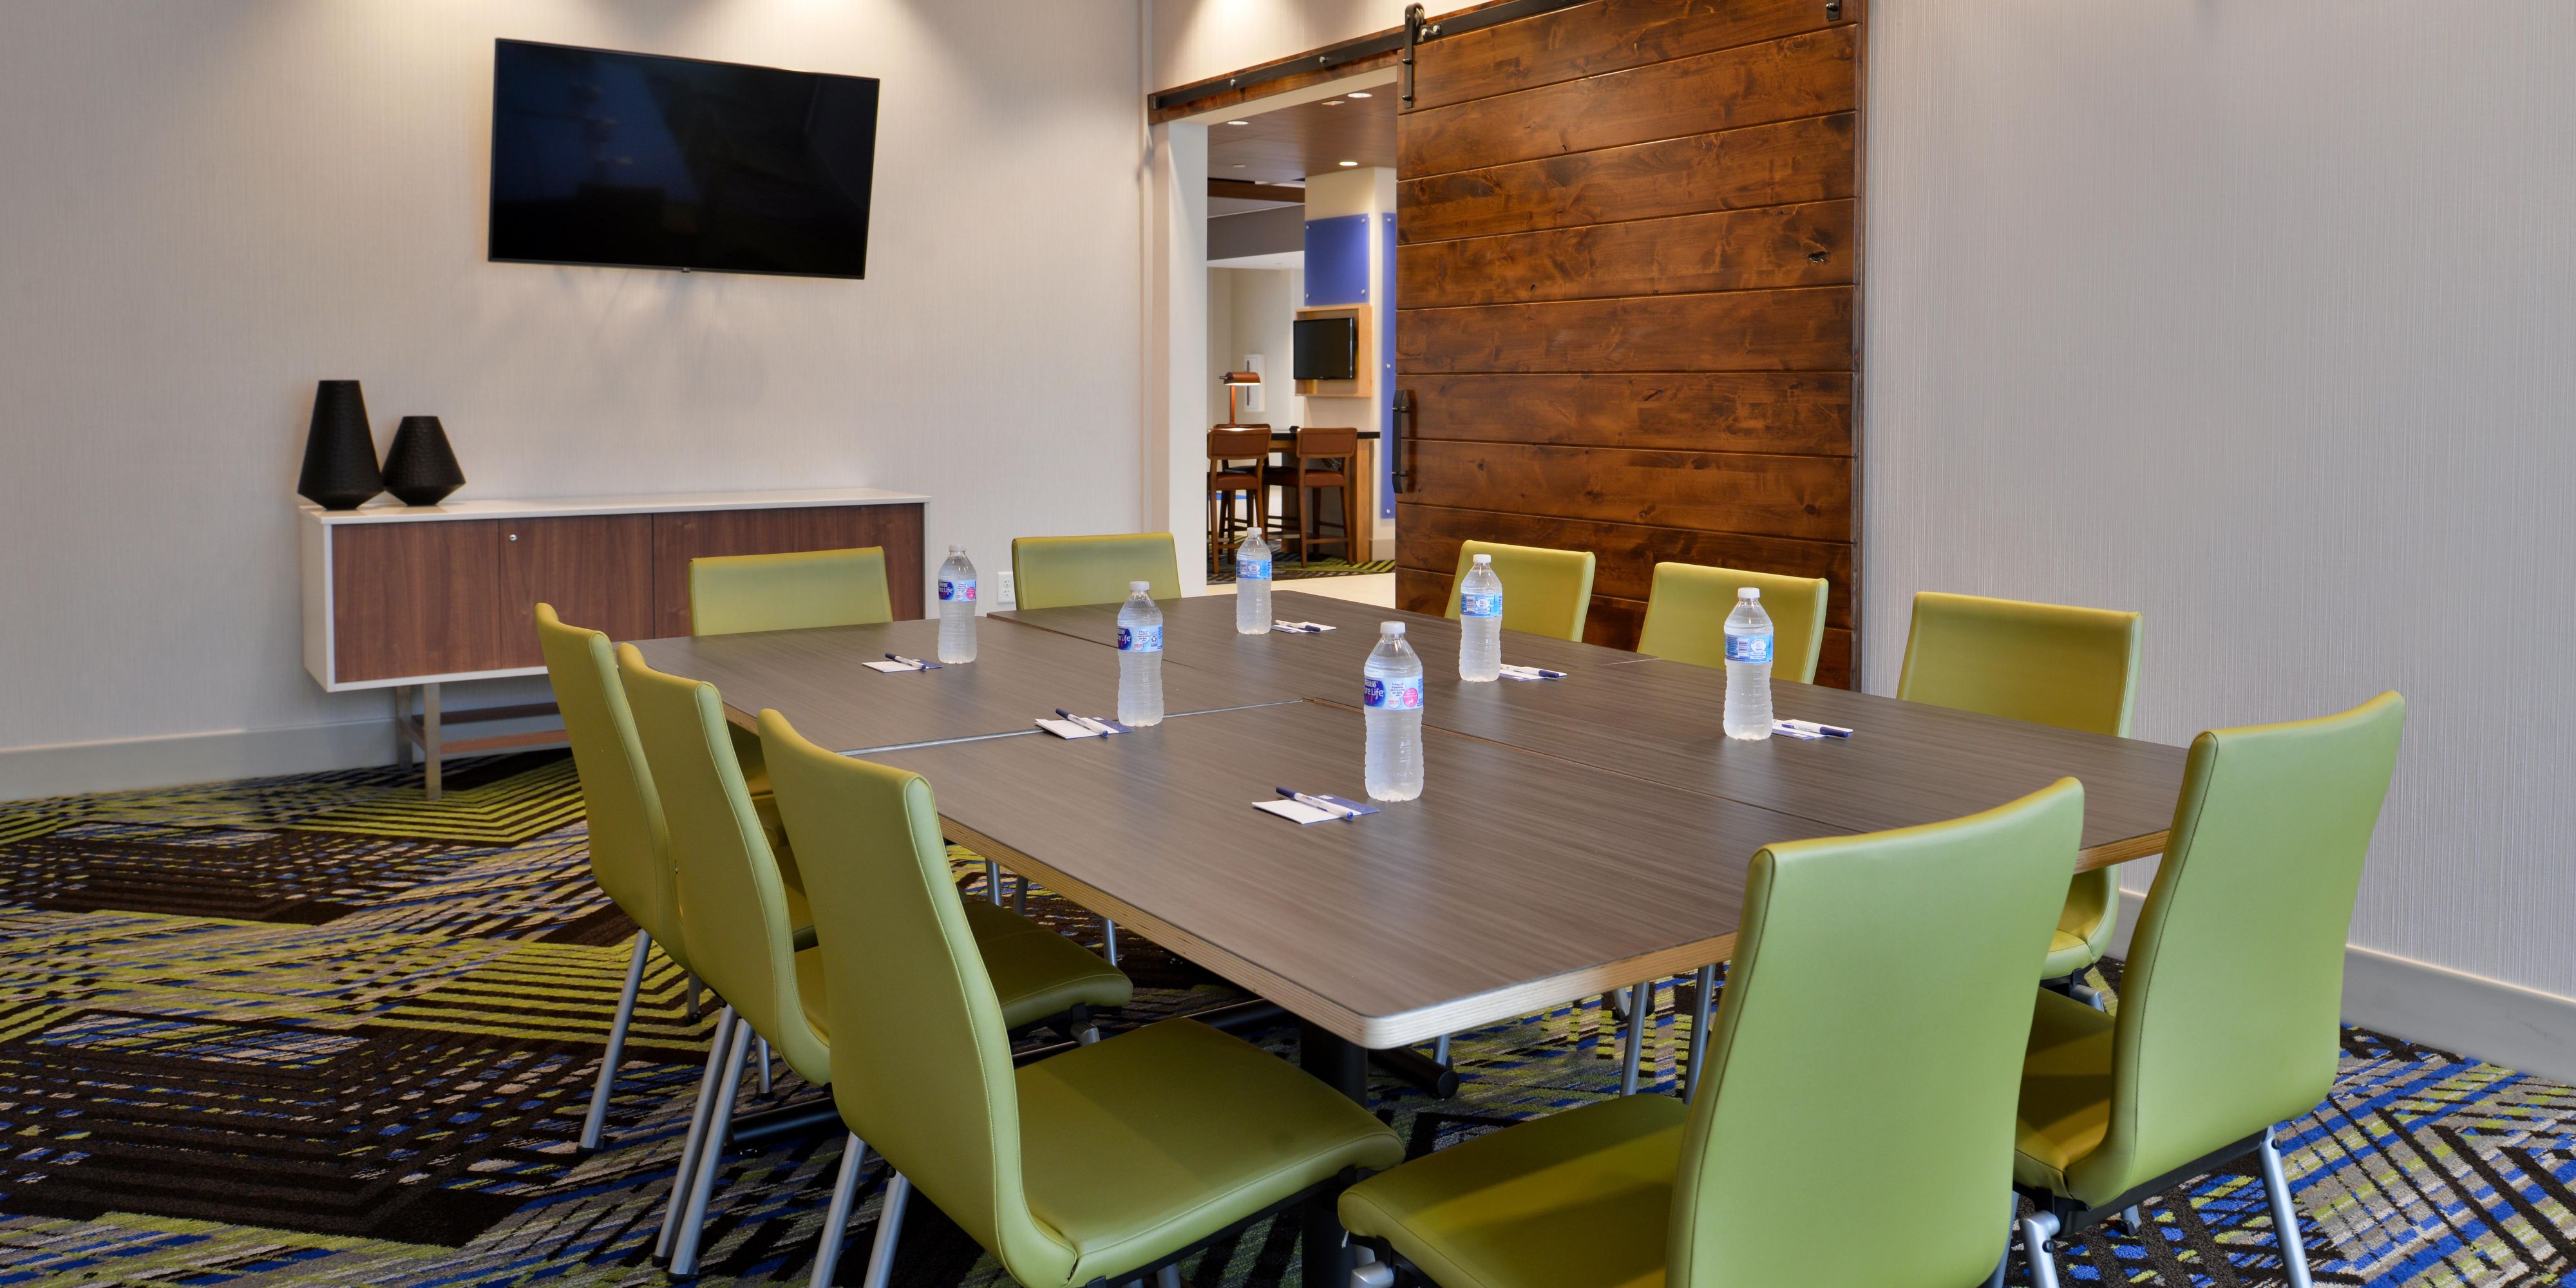 Meeting space is available for use in lobby. Meeting room can fit a total of 20 people and is 288 square feet. 

For more information and to reserve please call the hotel directly.